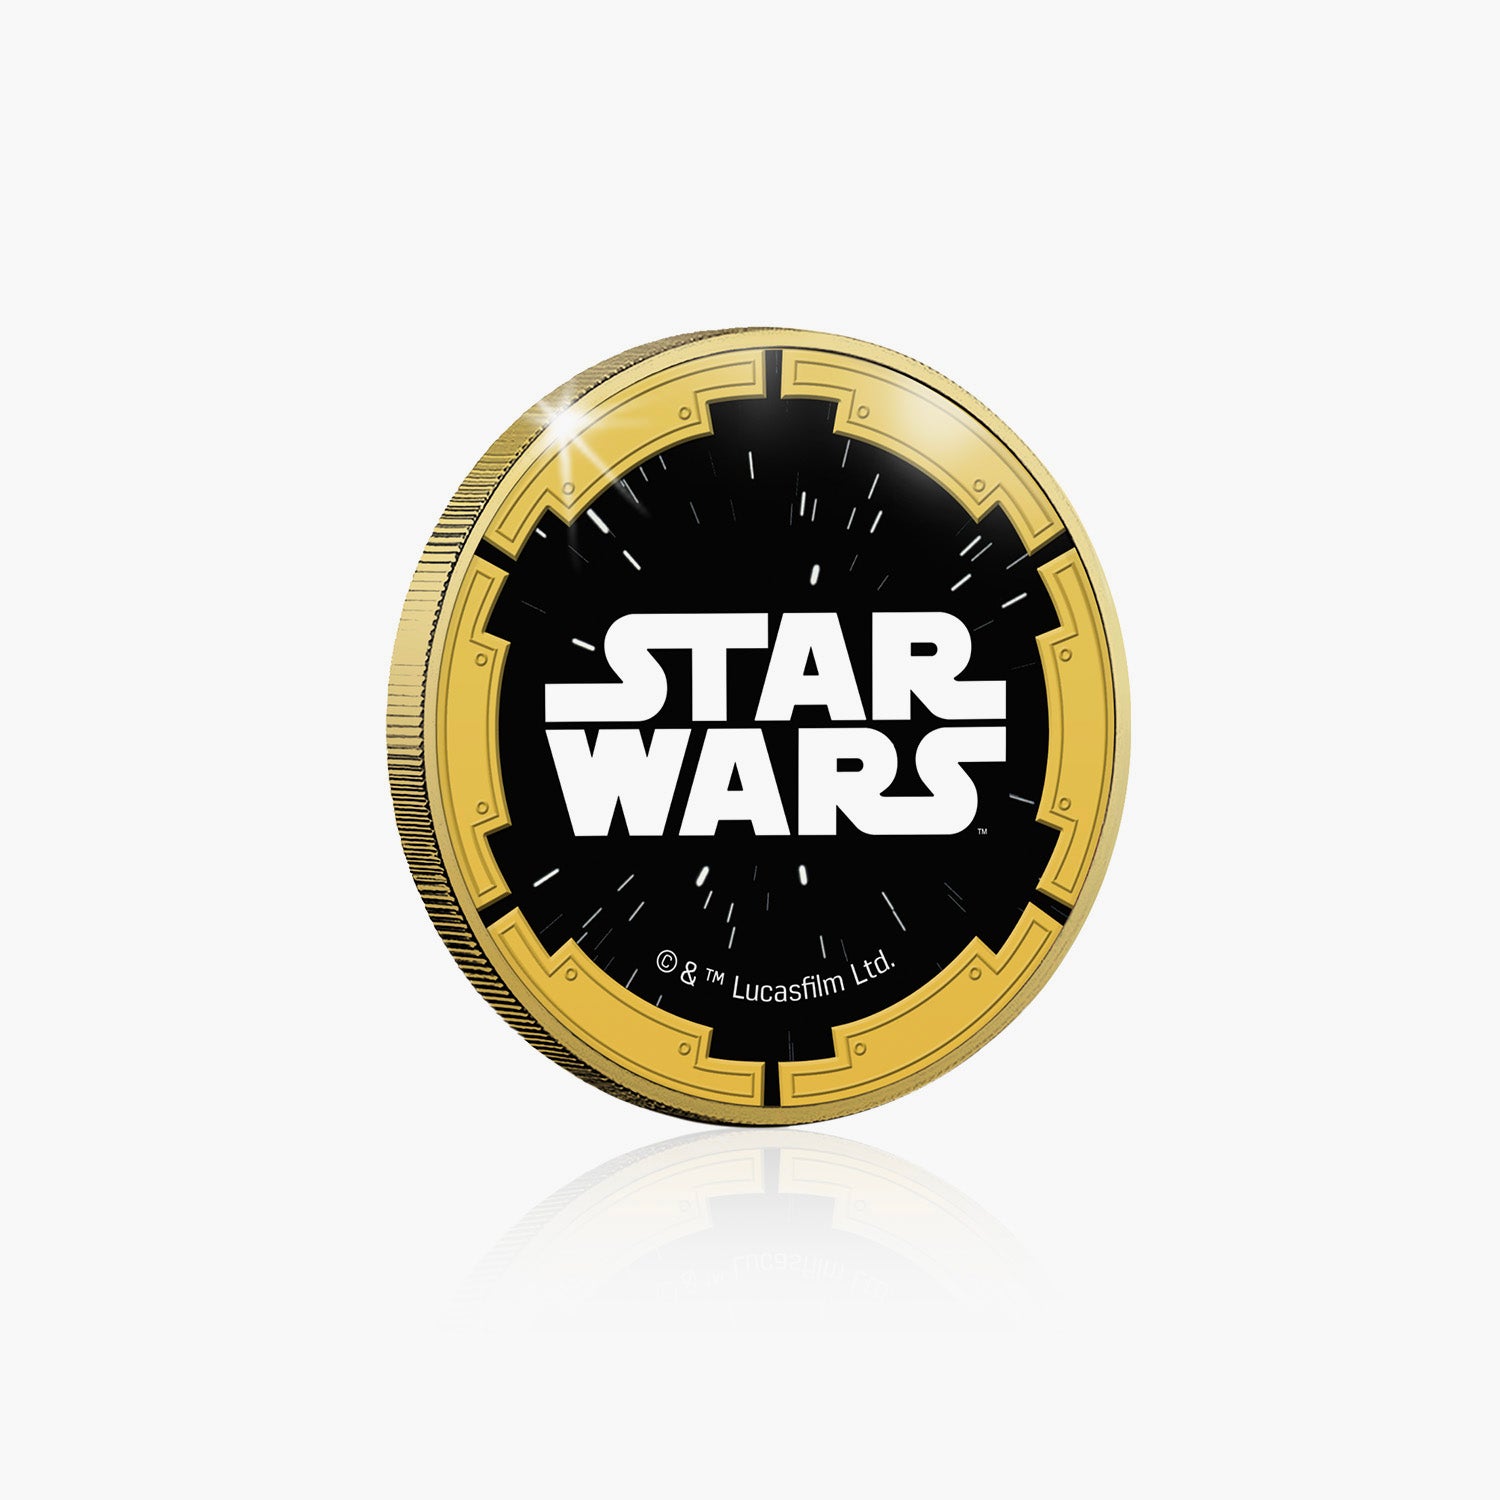 Chewbacca Gold - Plated Commemorative